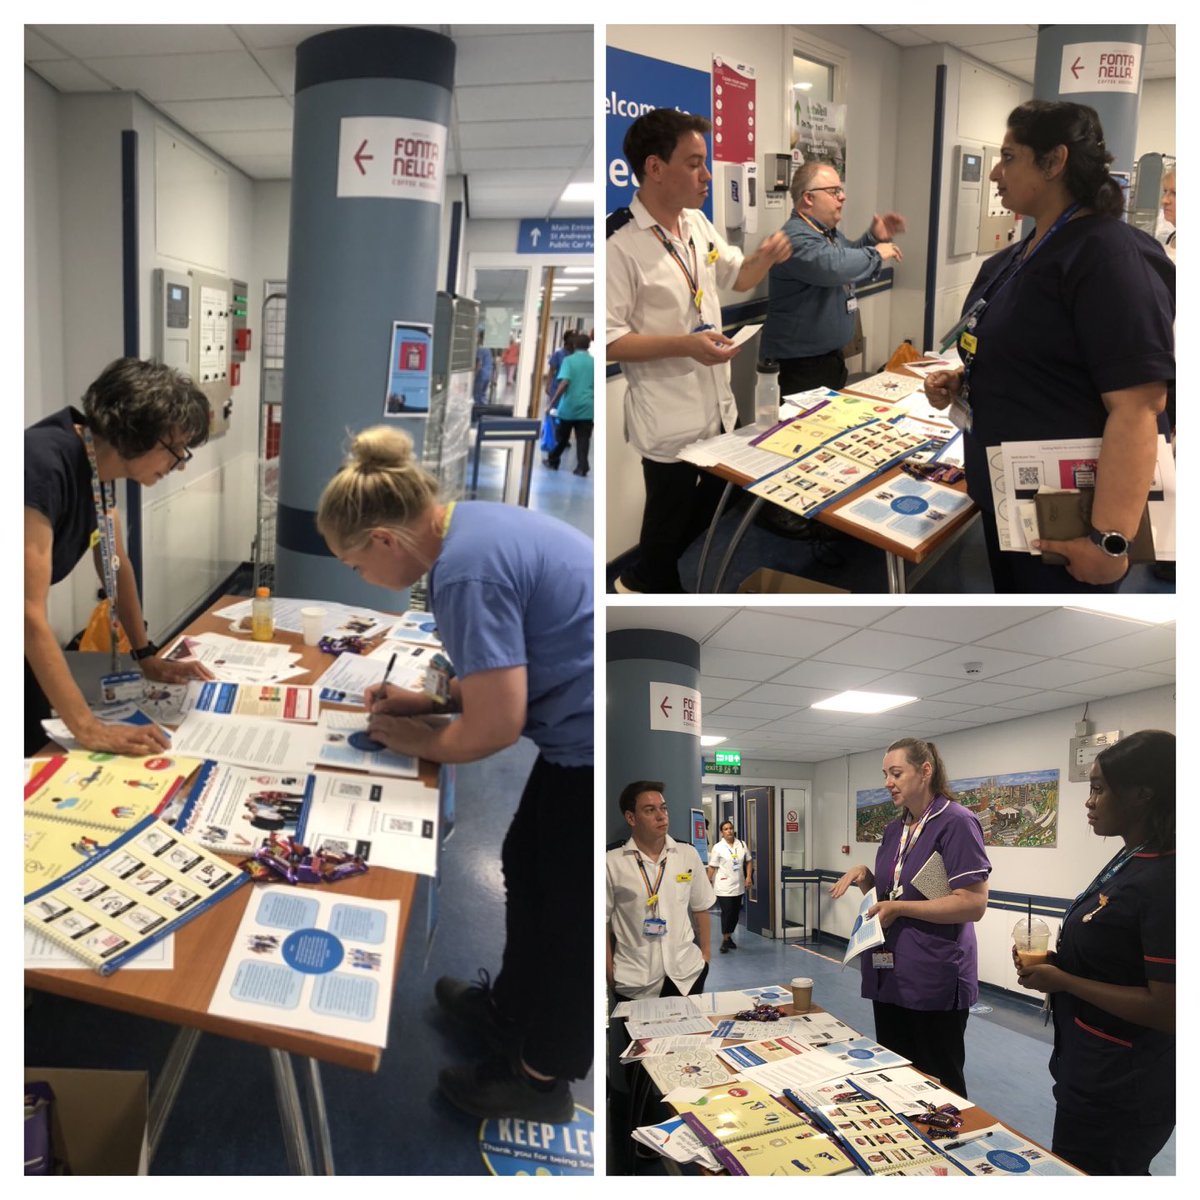 Some lovely interactions staff ⁦@NewhamHospital⁩ for #LDweek2023 ⁦@RThomson21⁩ #Michelle  ⁦@P_e_t_r_a____⁩ & ⁦@FionaAshanti_⁩ discussions on what most important @NHSbartshealth #LearningDisabilitiesVision ⁦⁦@ratansiz⁩ ⁦@CAlexanderNHS⁩